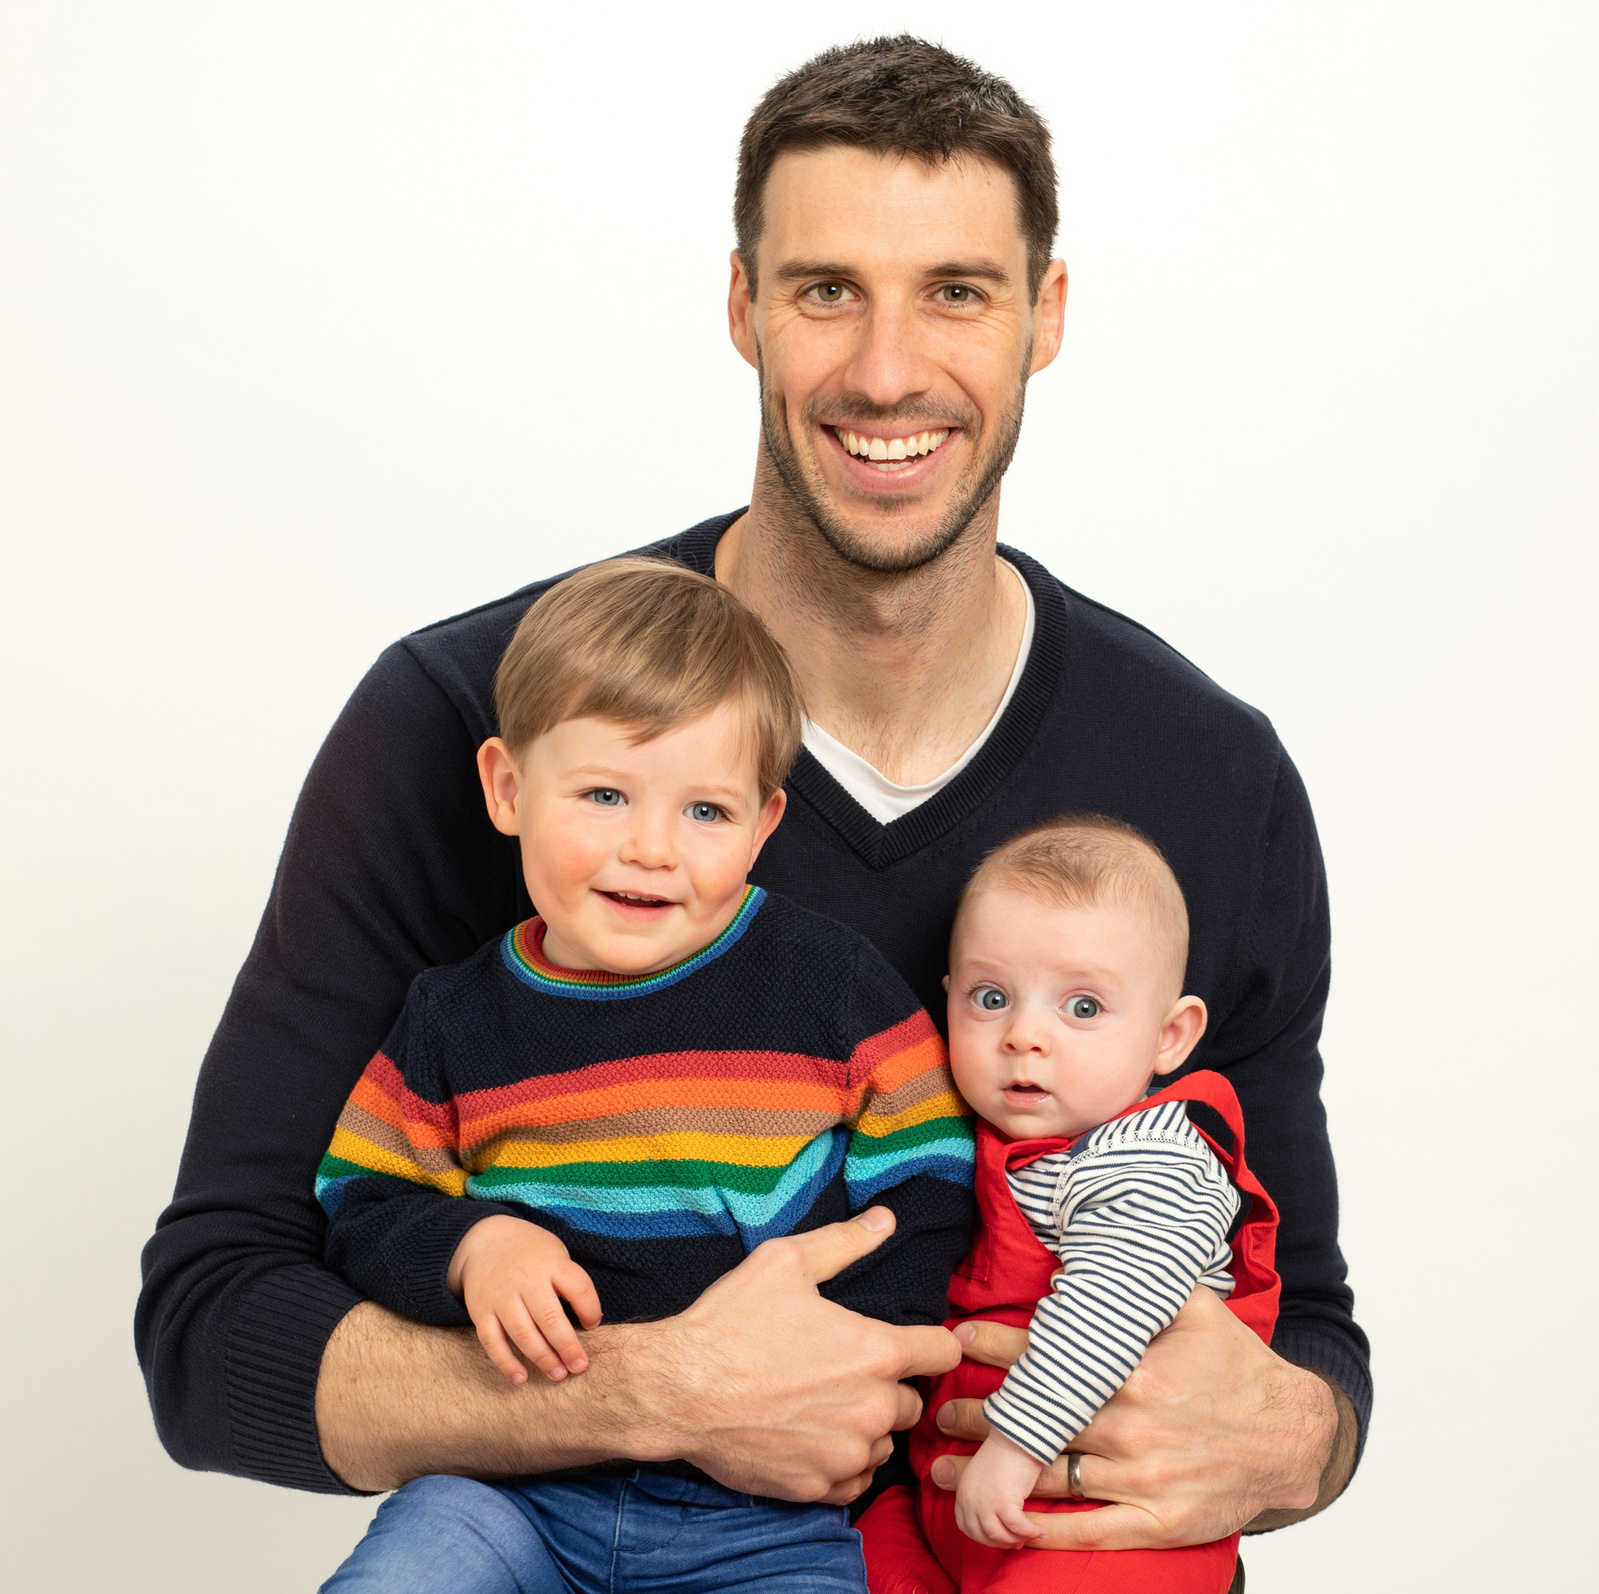 Classic portrait of a young Dad with his two small children taken in a professional family photography studio in Dublin white background